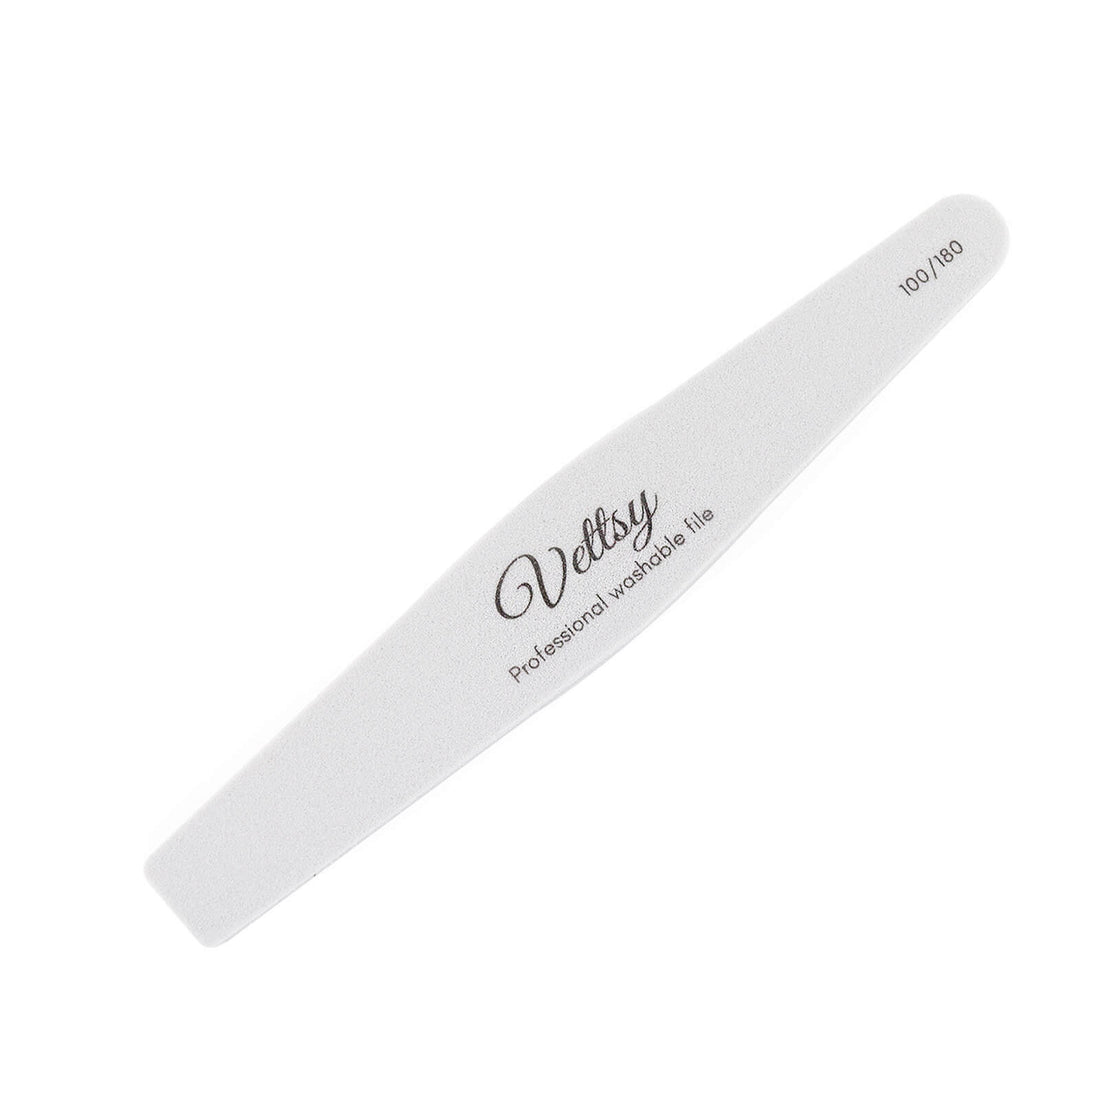 Nail Files white and Pink 50 ct - 100/100